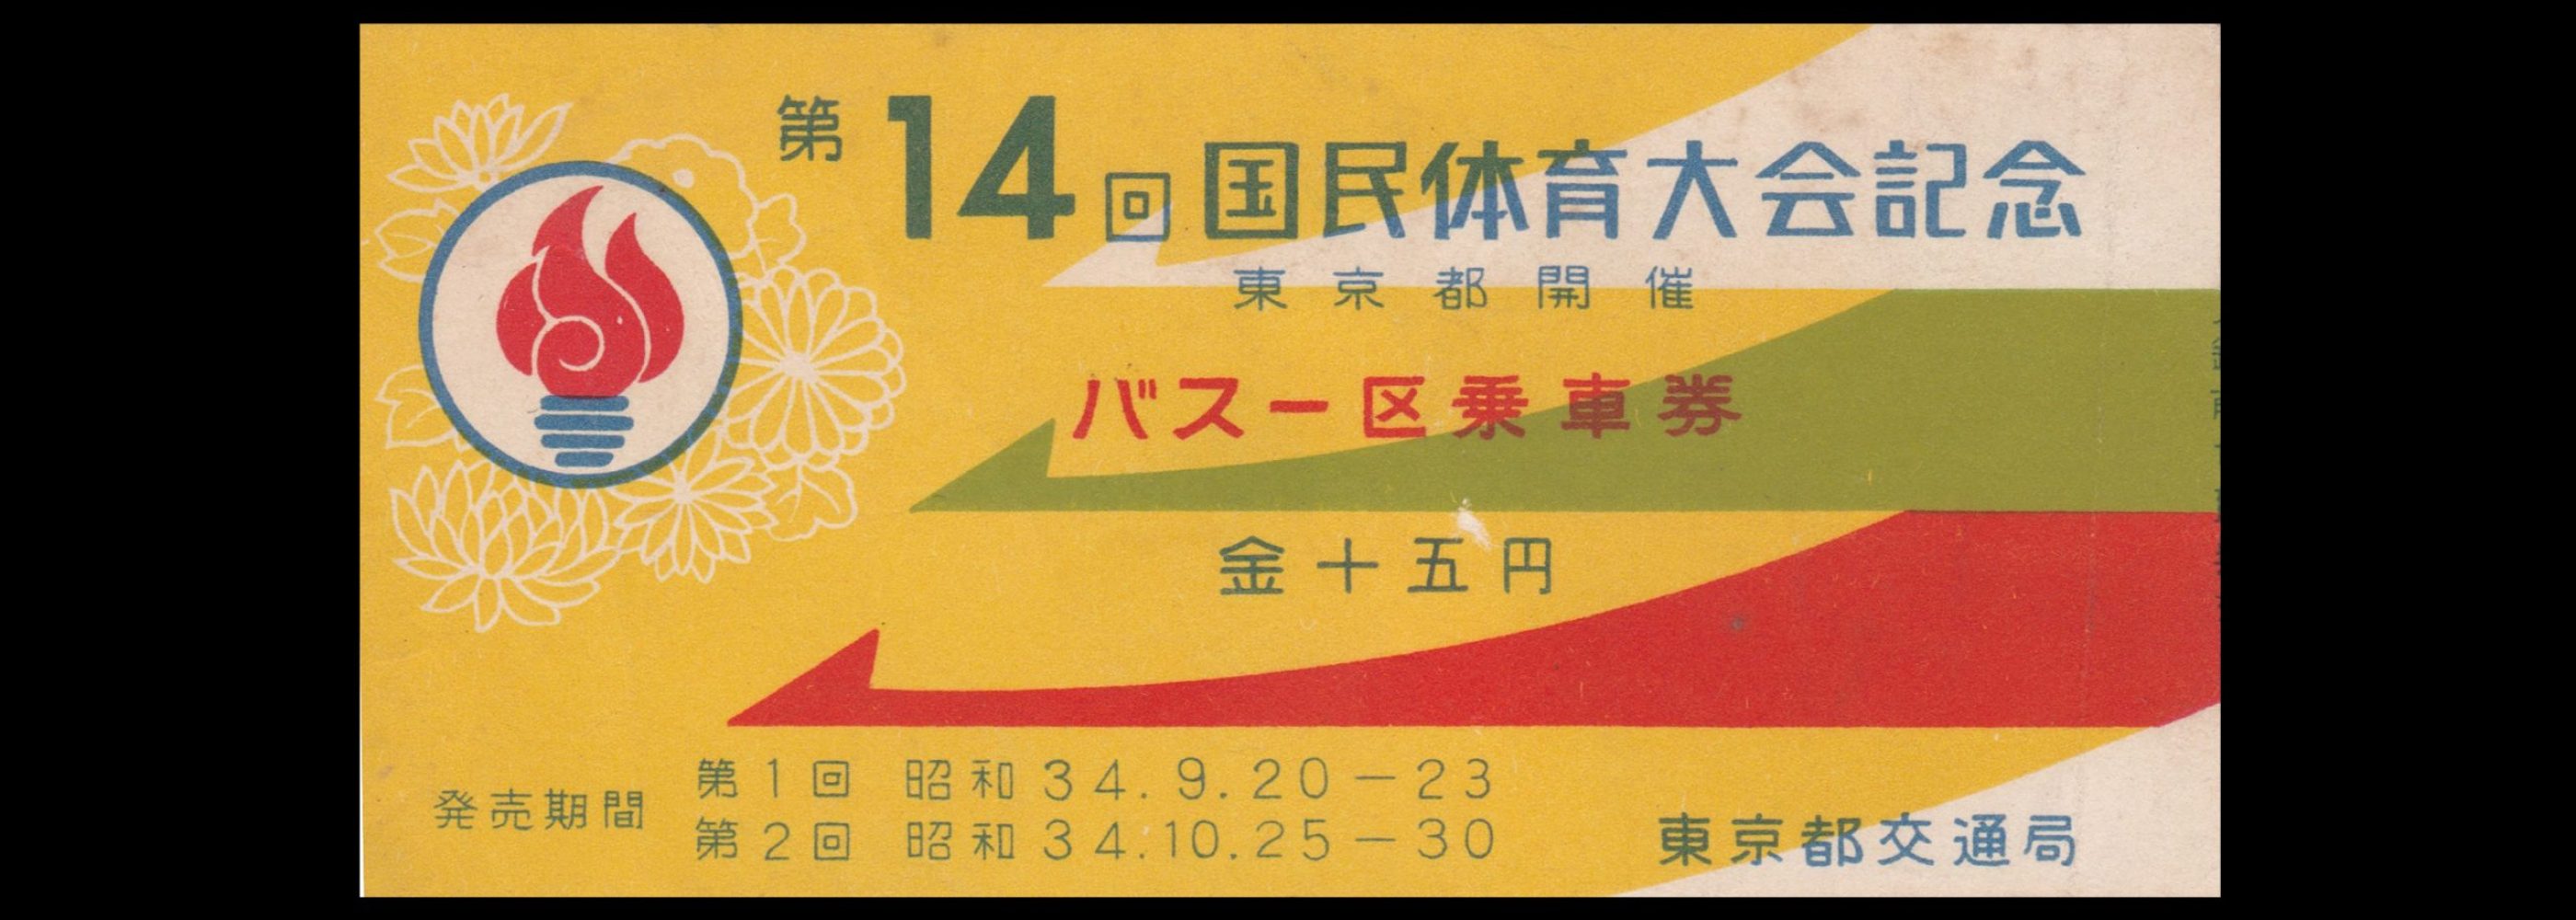 Tokyo Olympic Games 1964 Ticket